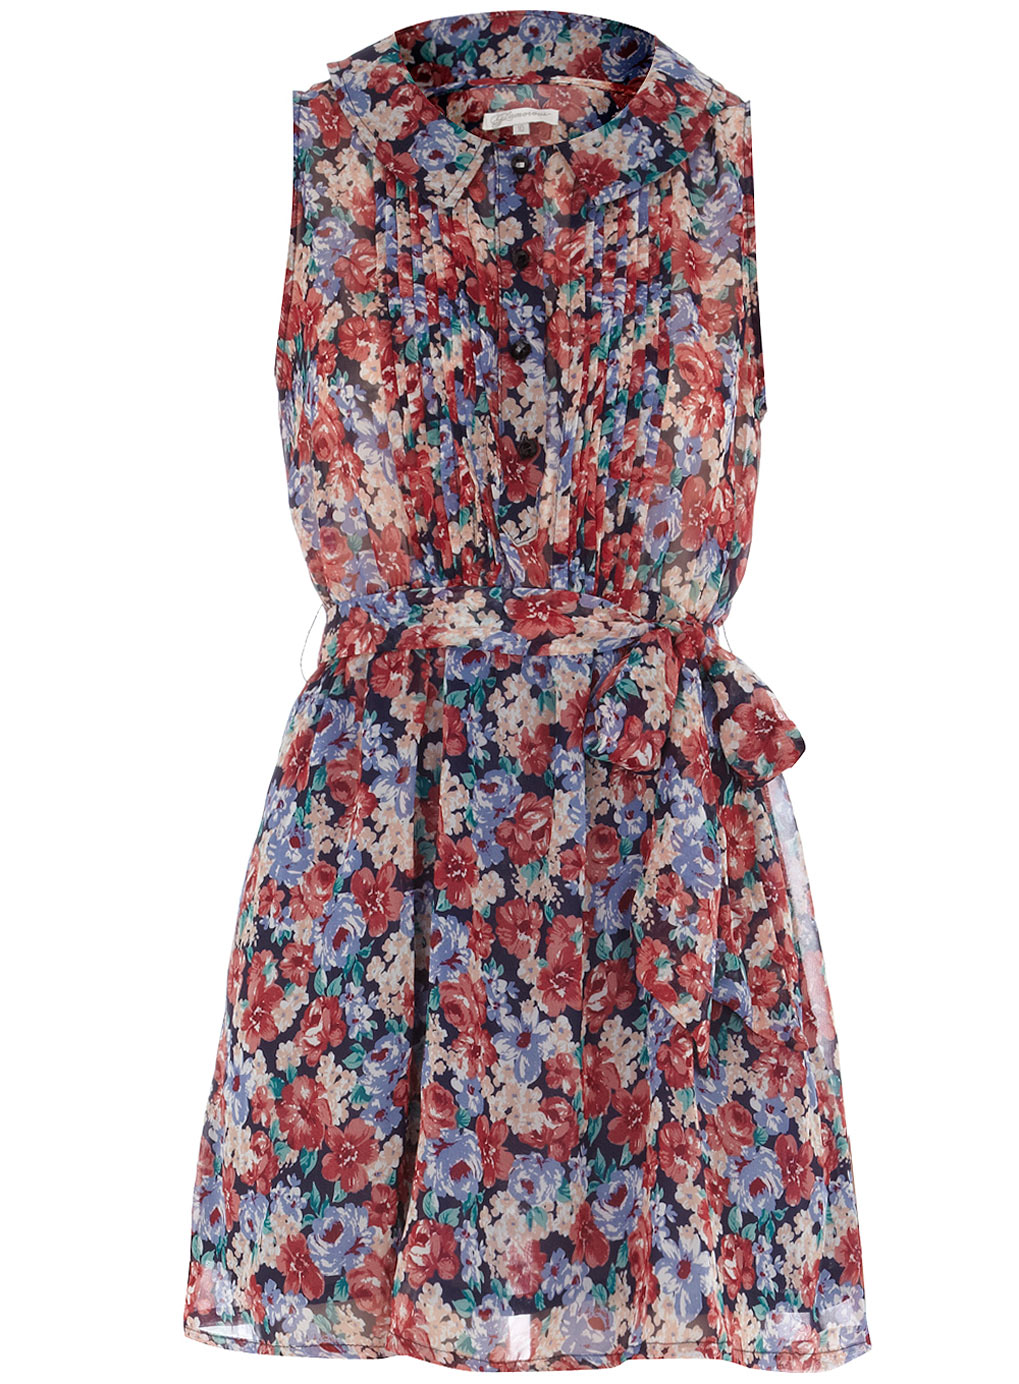 Dorothy Perkins' Floral Dresses. - Nerd About Town